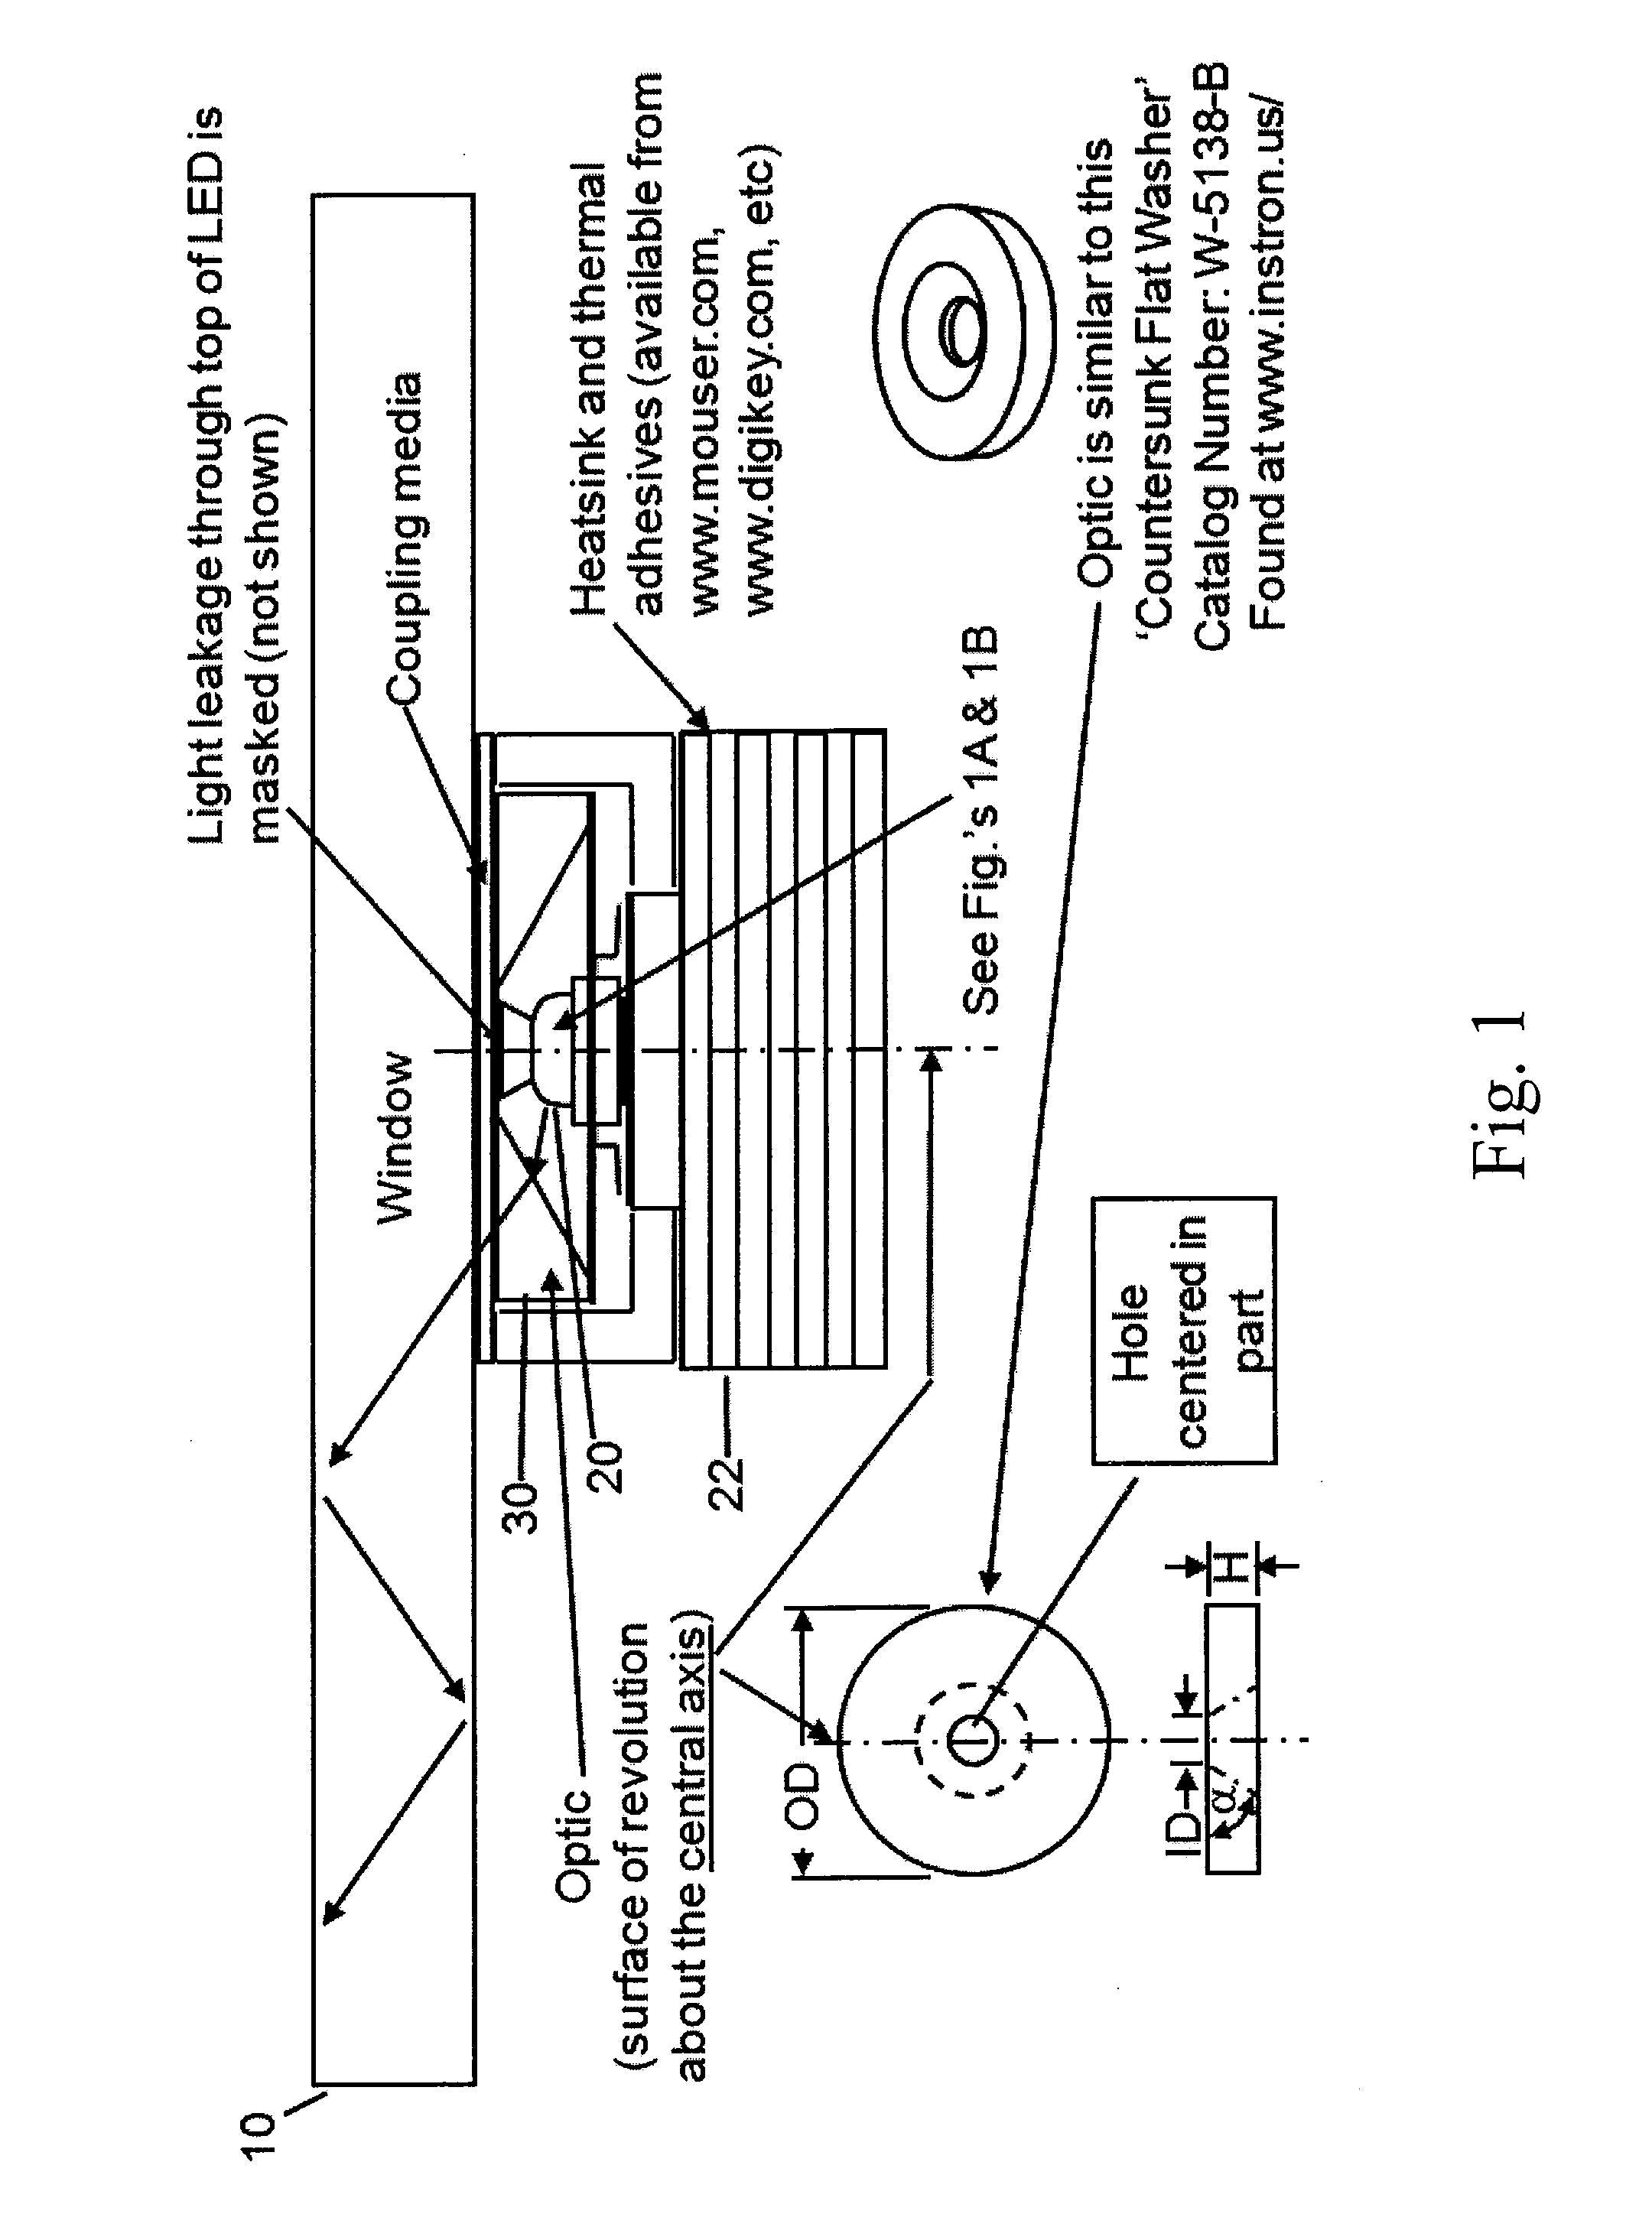 Non-invasive injection of light into a transparent substrate, such as a window pane through its face